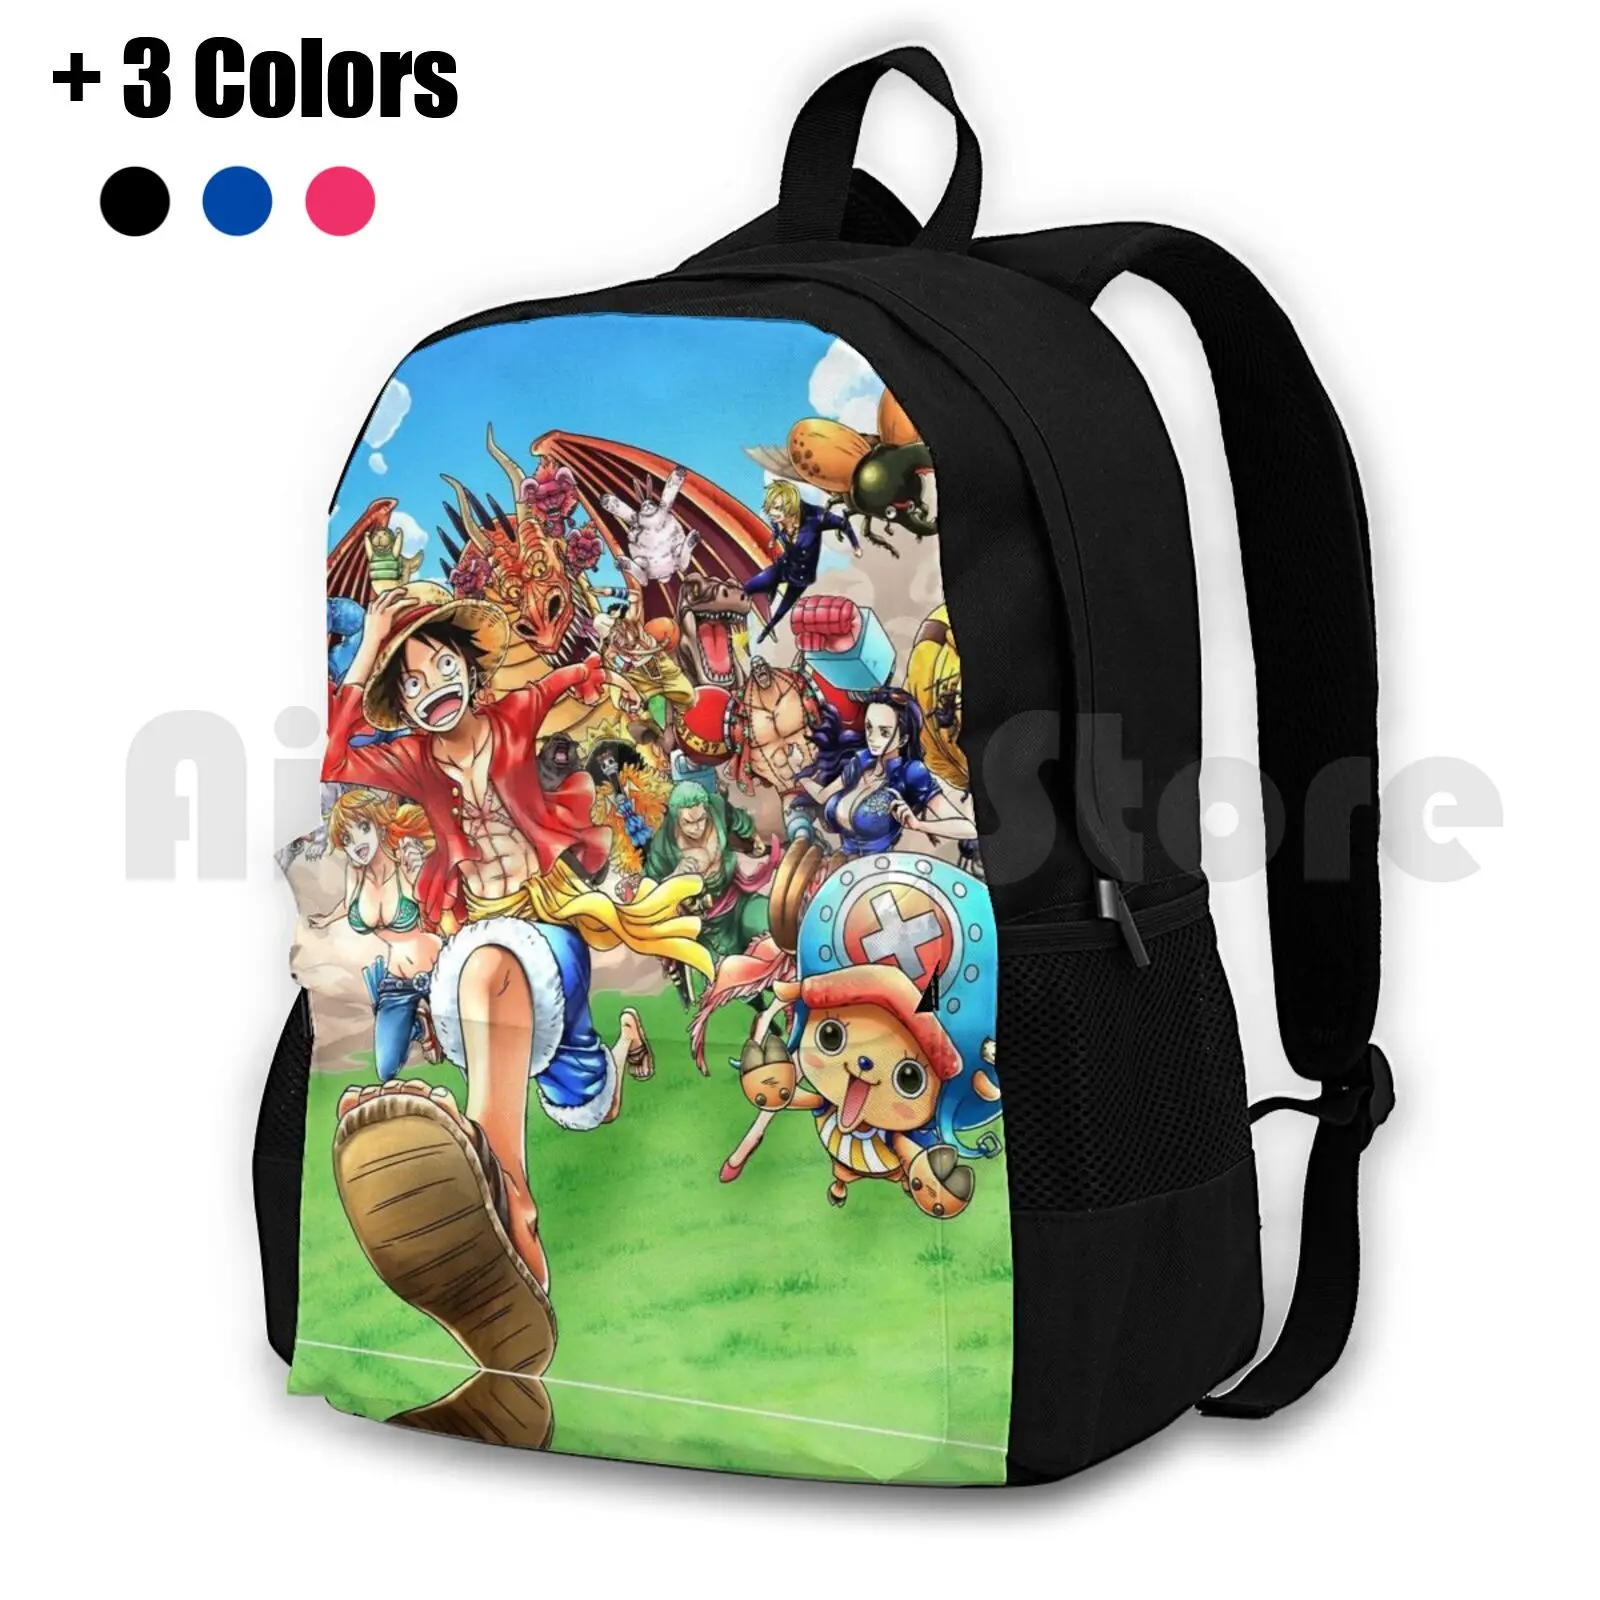 

One Piece Poster Merch #1 Outdoor Hiking Backpack Riding Climbing Sports Bag One Piece One Piece Luffy Wano Zoro Ace Manga One